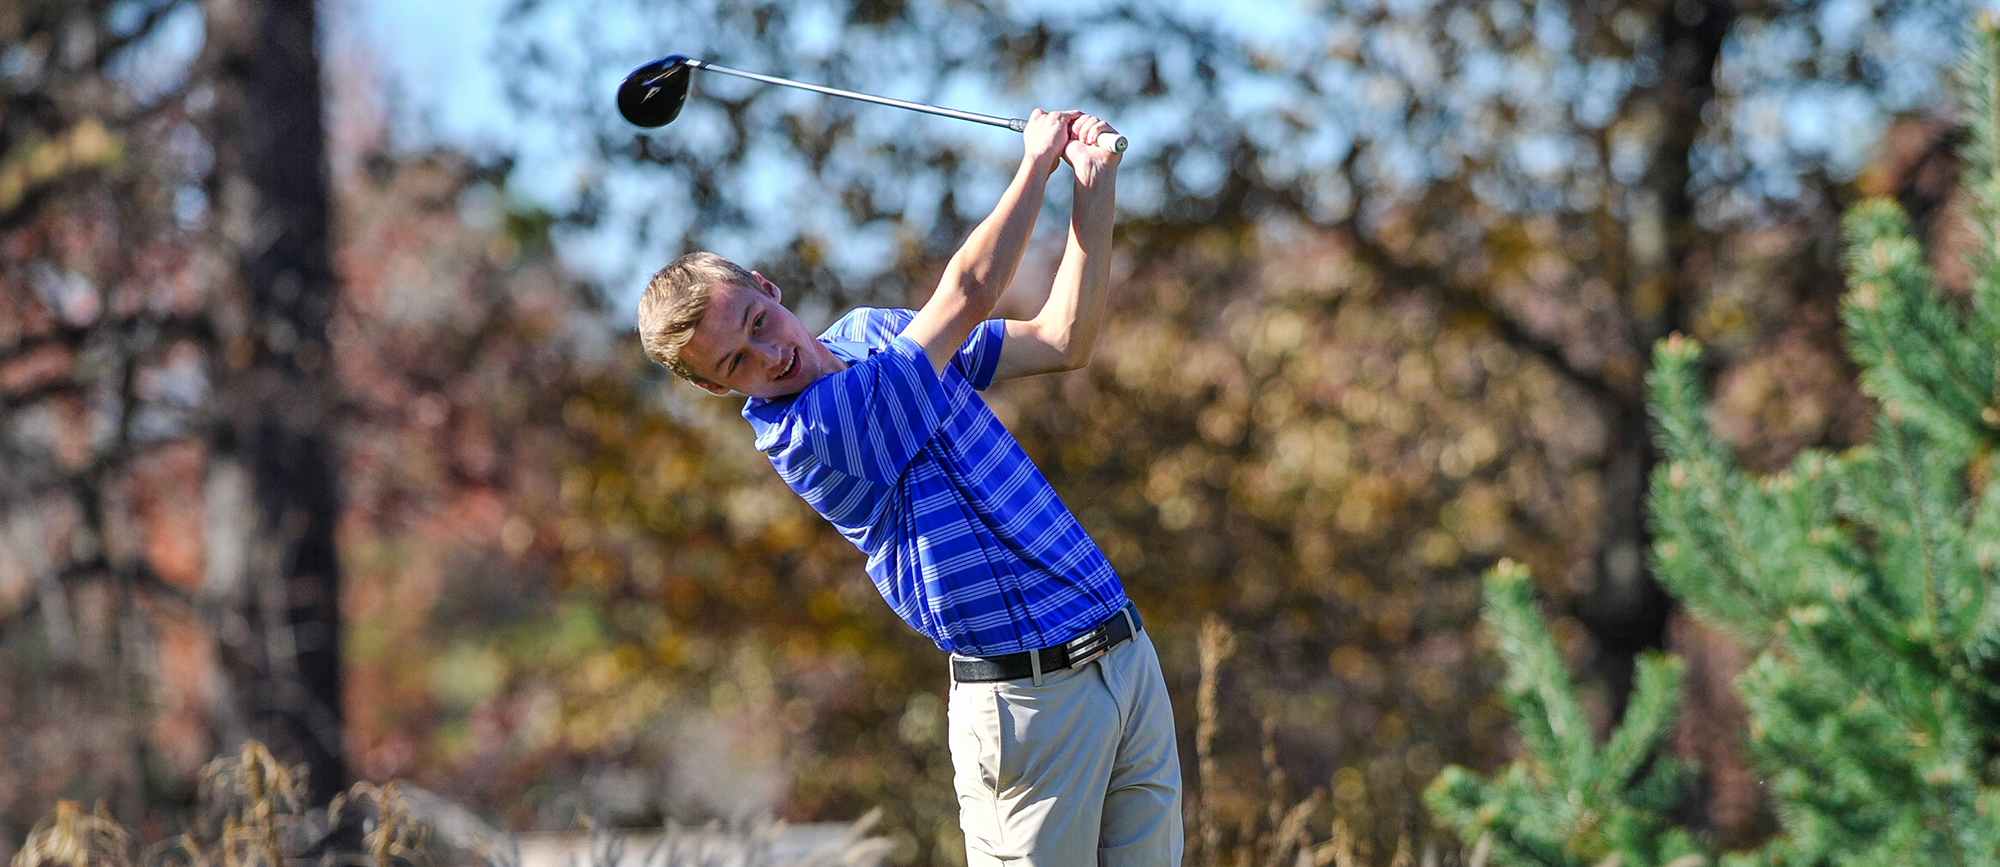 Senior John Abbott finished tied for eighth place with a five-over par 77 as the Golden Bears opened their spring season with a sixth-place finish at the Rhode Island College Invitational on Saturday. (Photo by Bill Sharon/Spartan Sportshots)